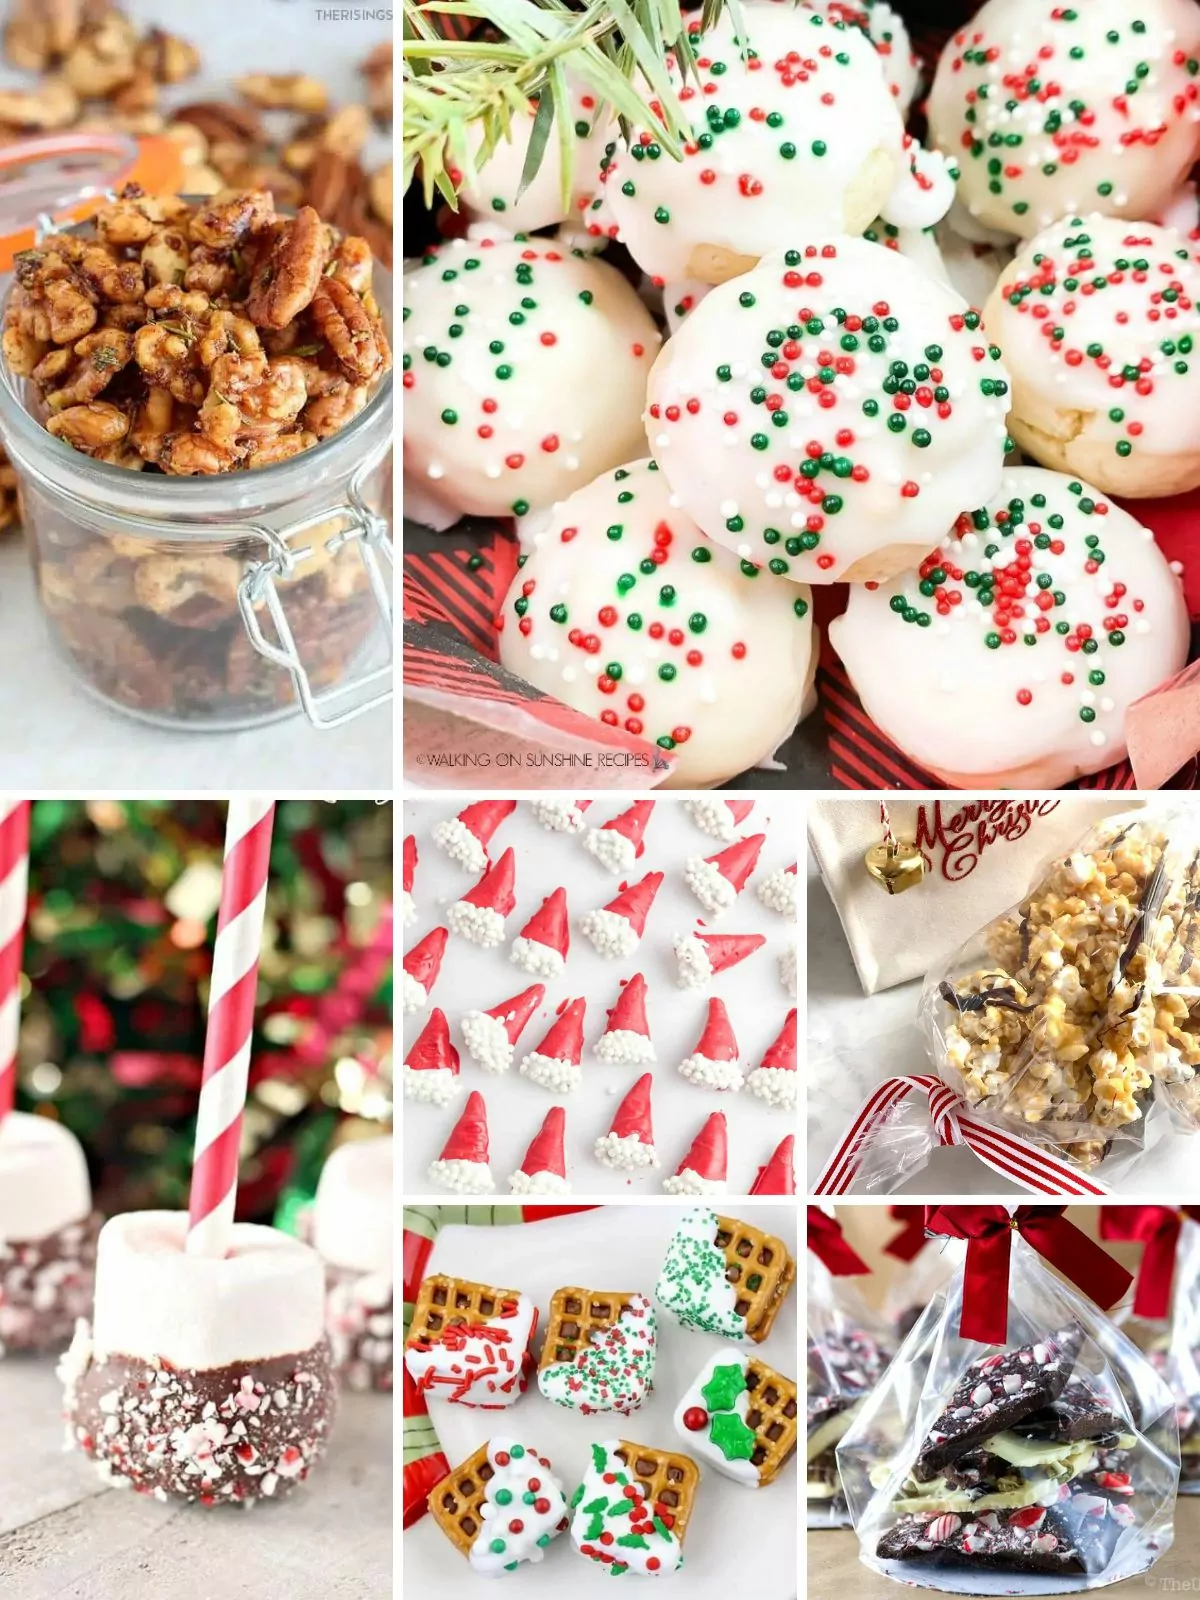 easy snack ideas to wrap and give as gifts for the holidays.